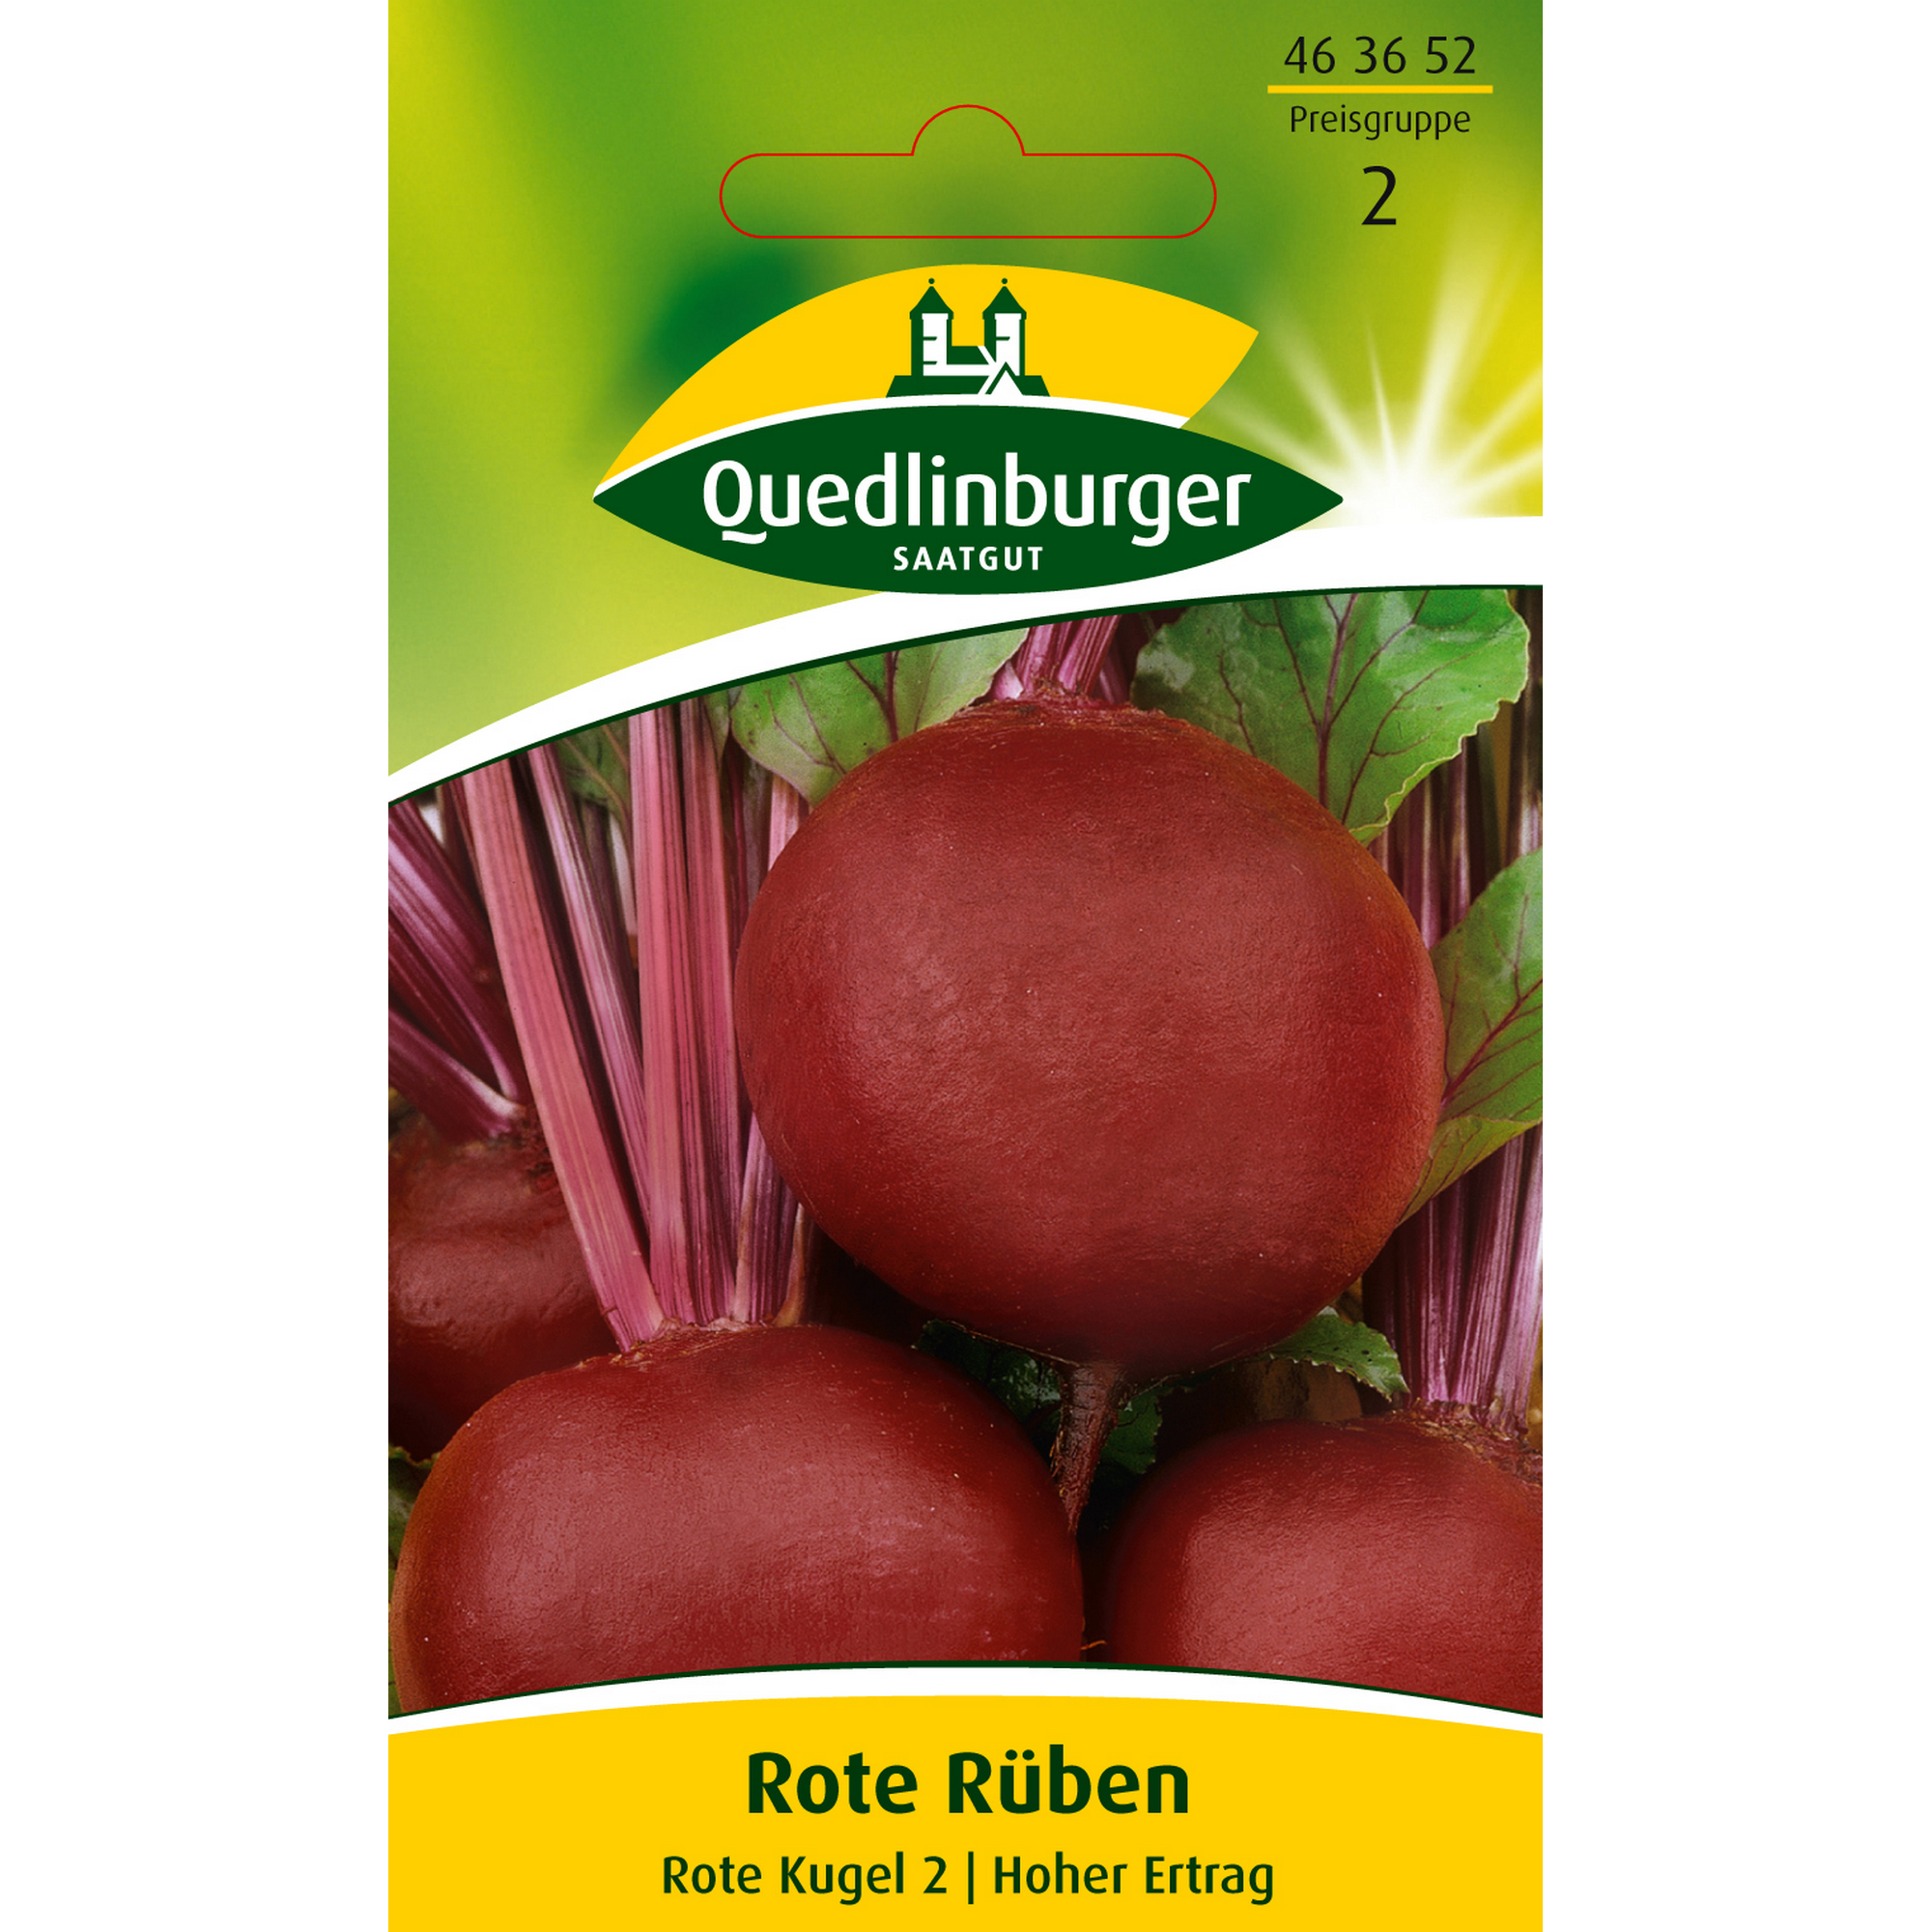 Rote Rübe 'Rote Kugel 2' + product picture